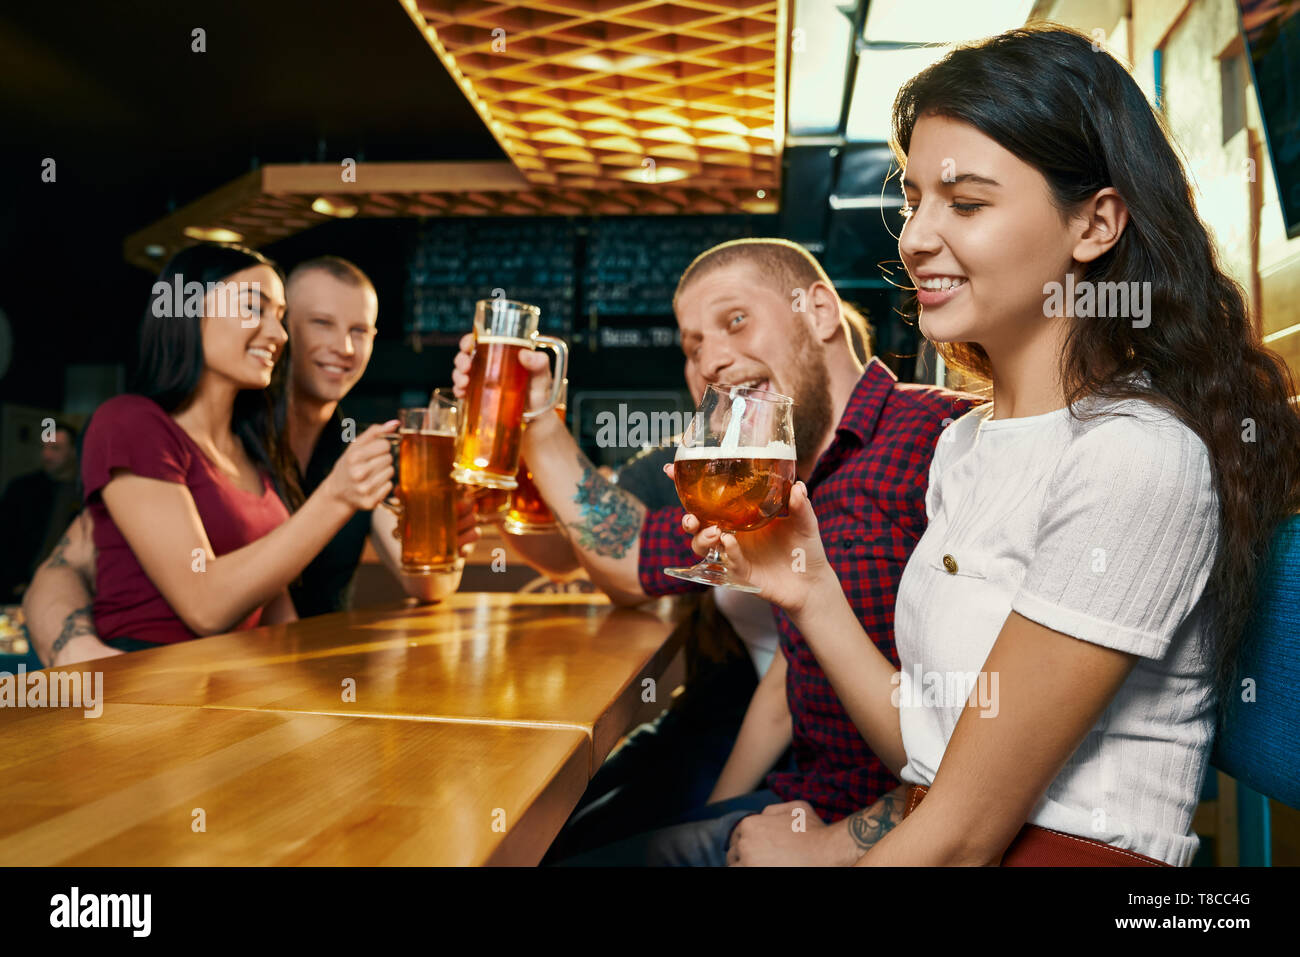 Side view of young smiling brunette enjoying free time with happy friends and drinking beer in bar. Cheerful company drinking alcohol, talking and laughing in pub. Concept of beverage and fun. Stock Photo